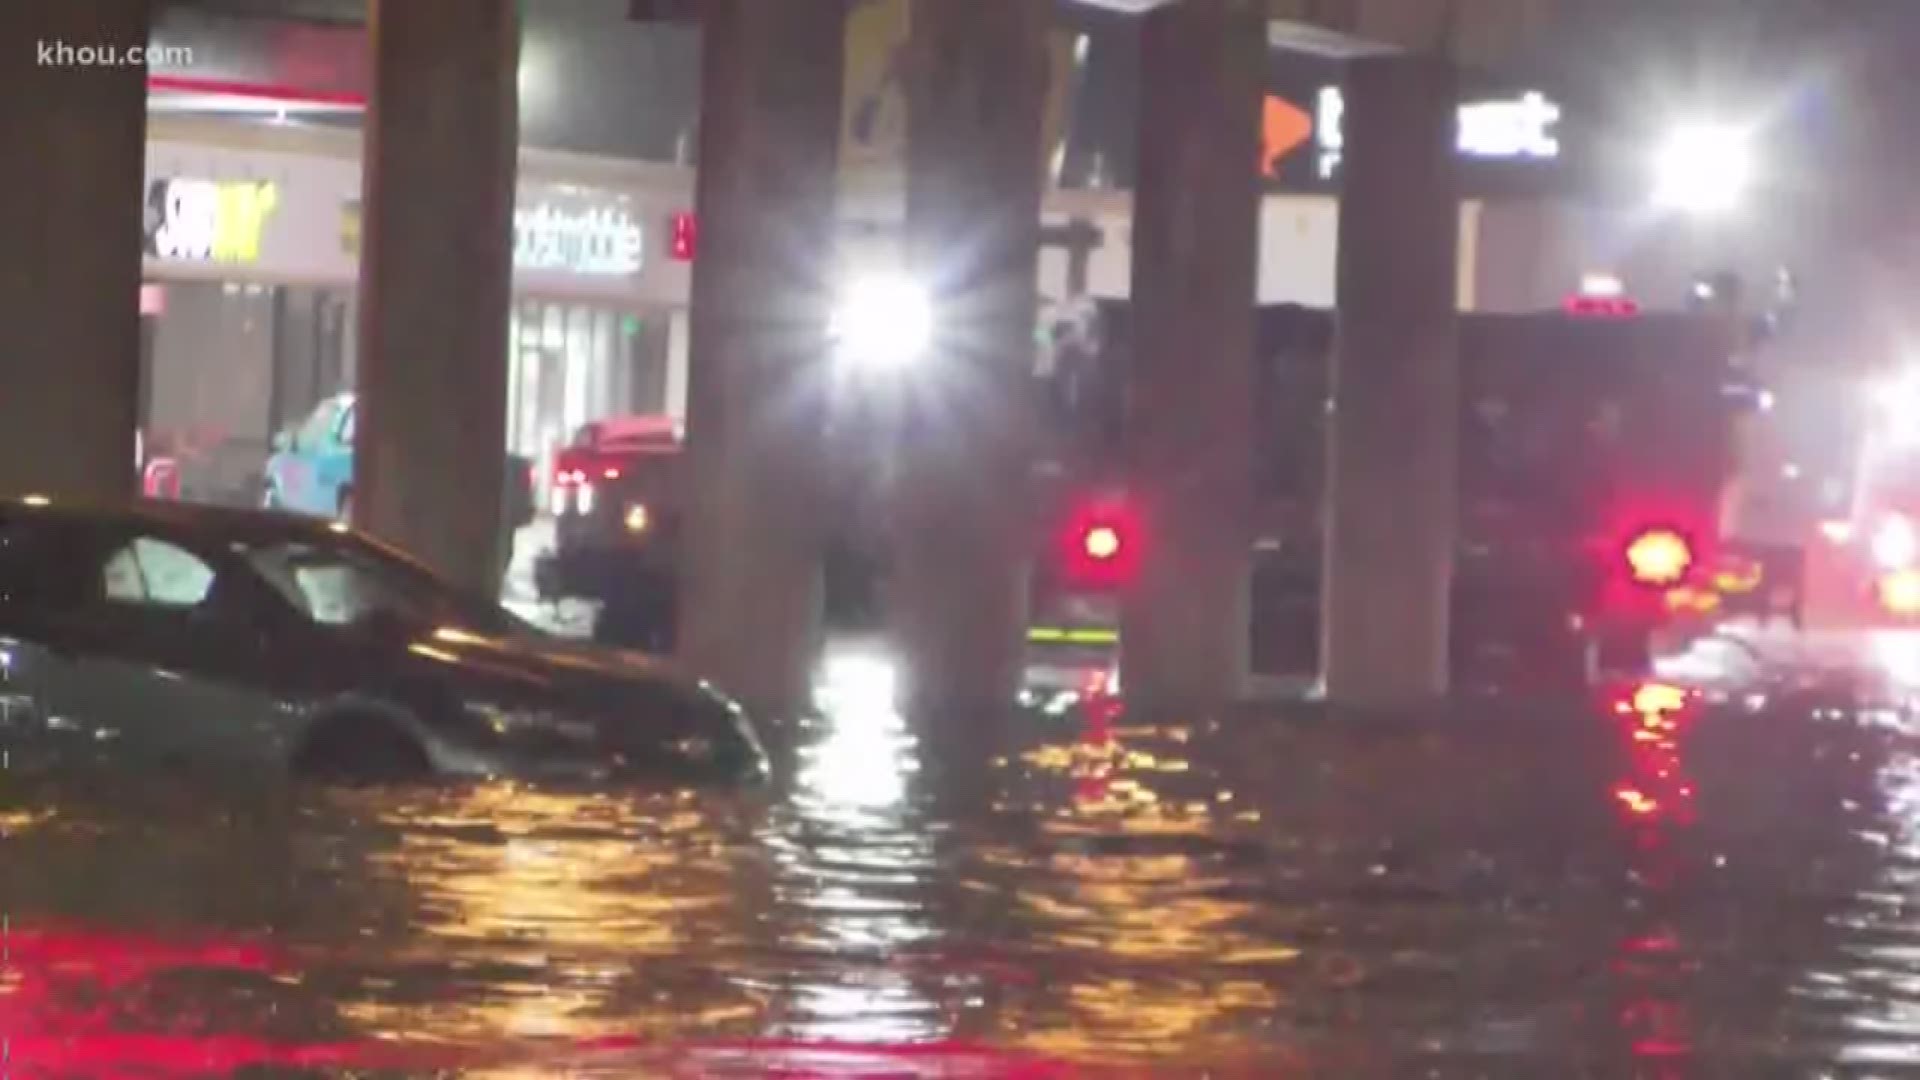 Some drivers were not able to escape the floodwaters from Friday night's thunderstorms. We found several cars stalled out in the middle of the street as the water subsided.